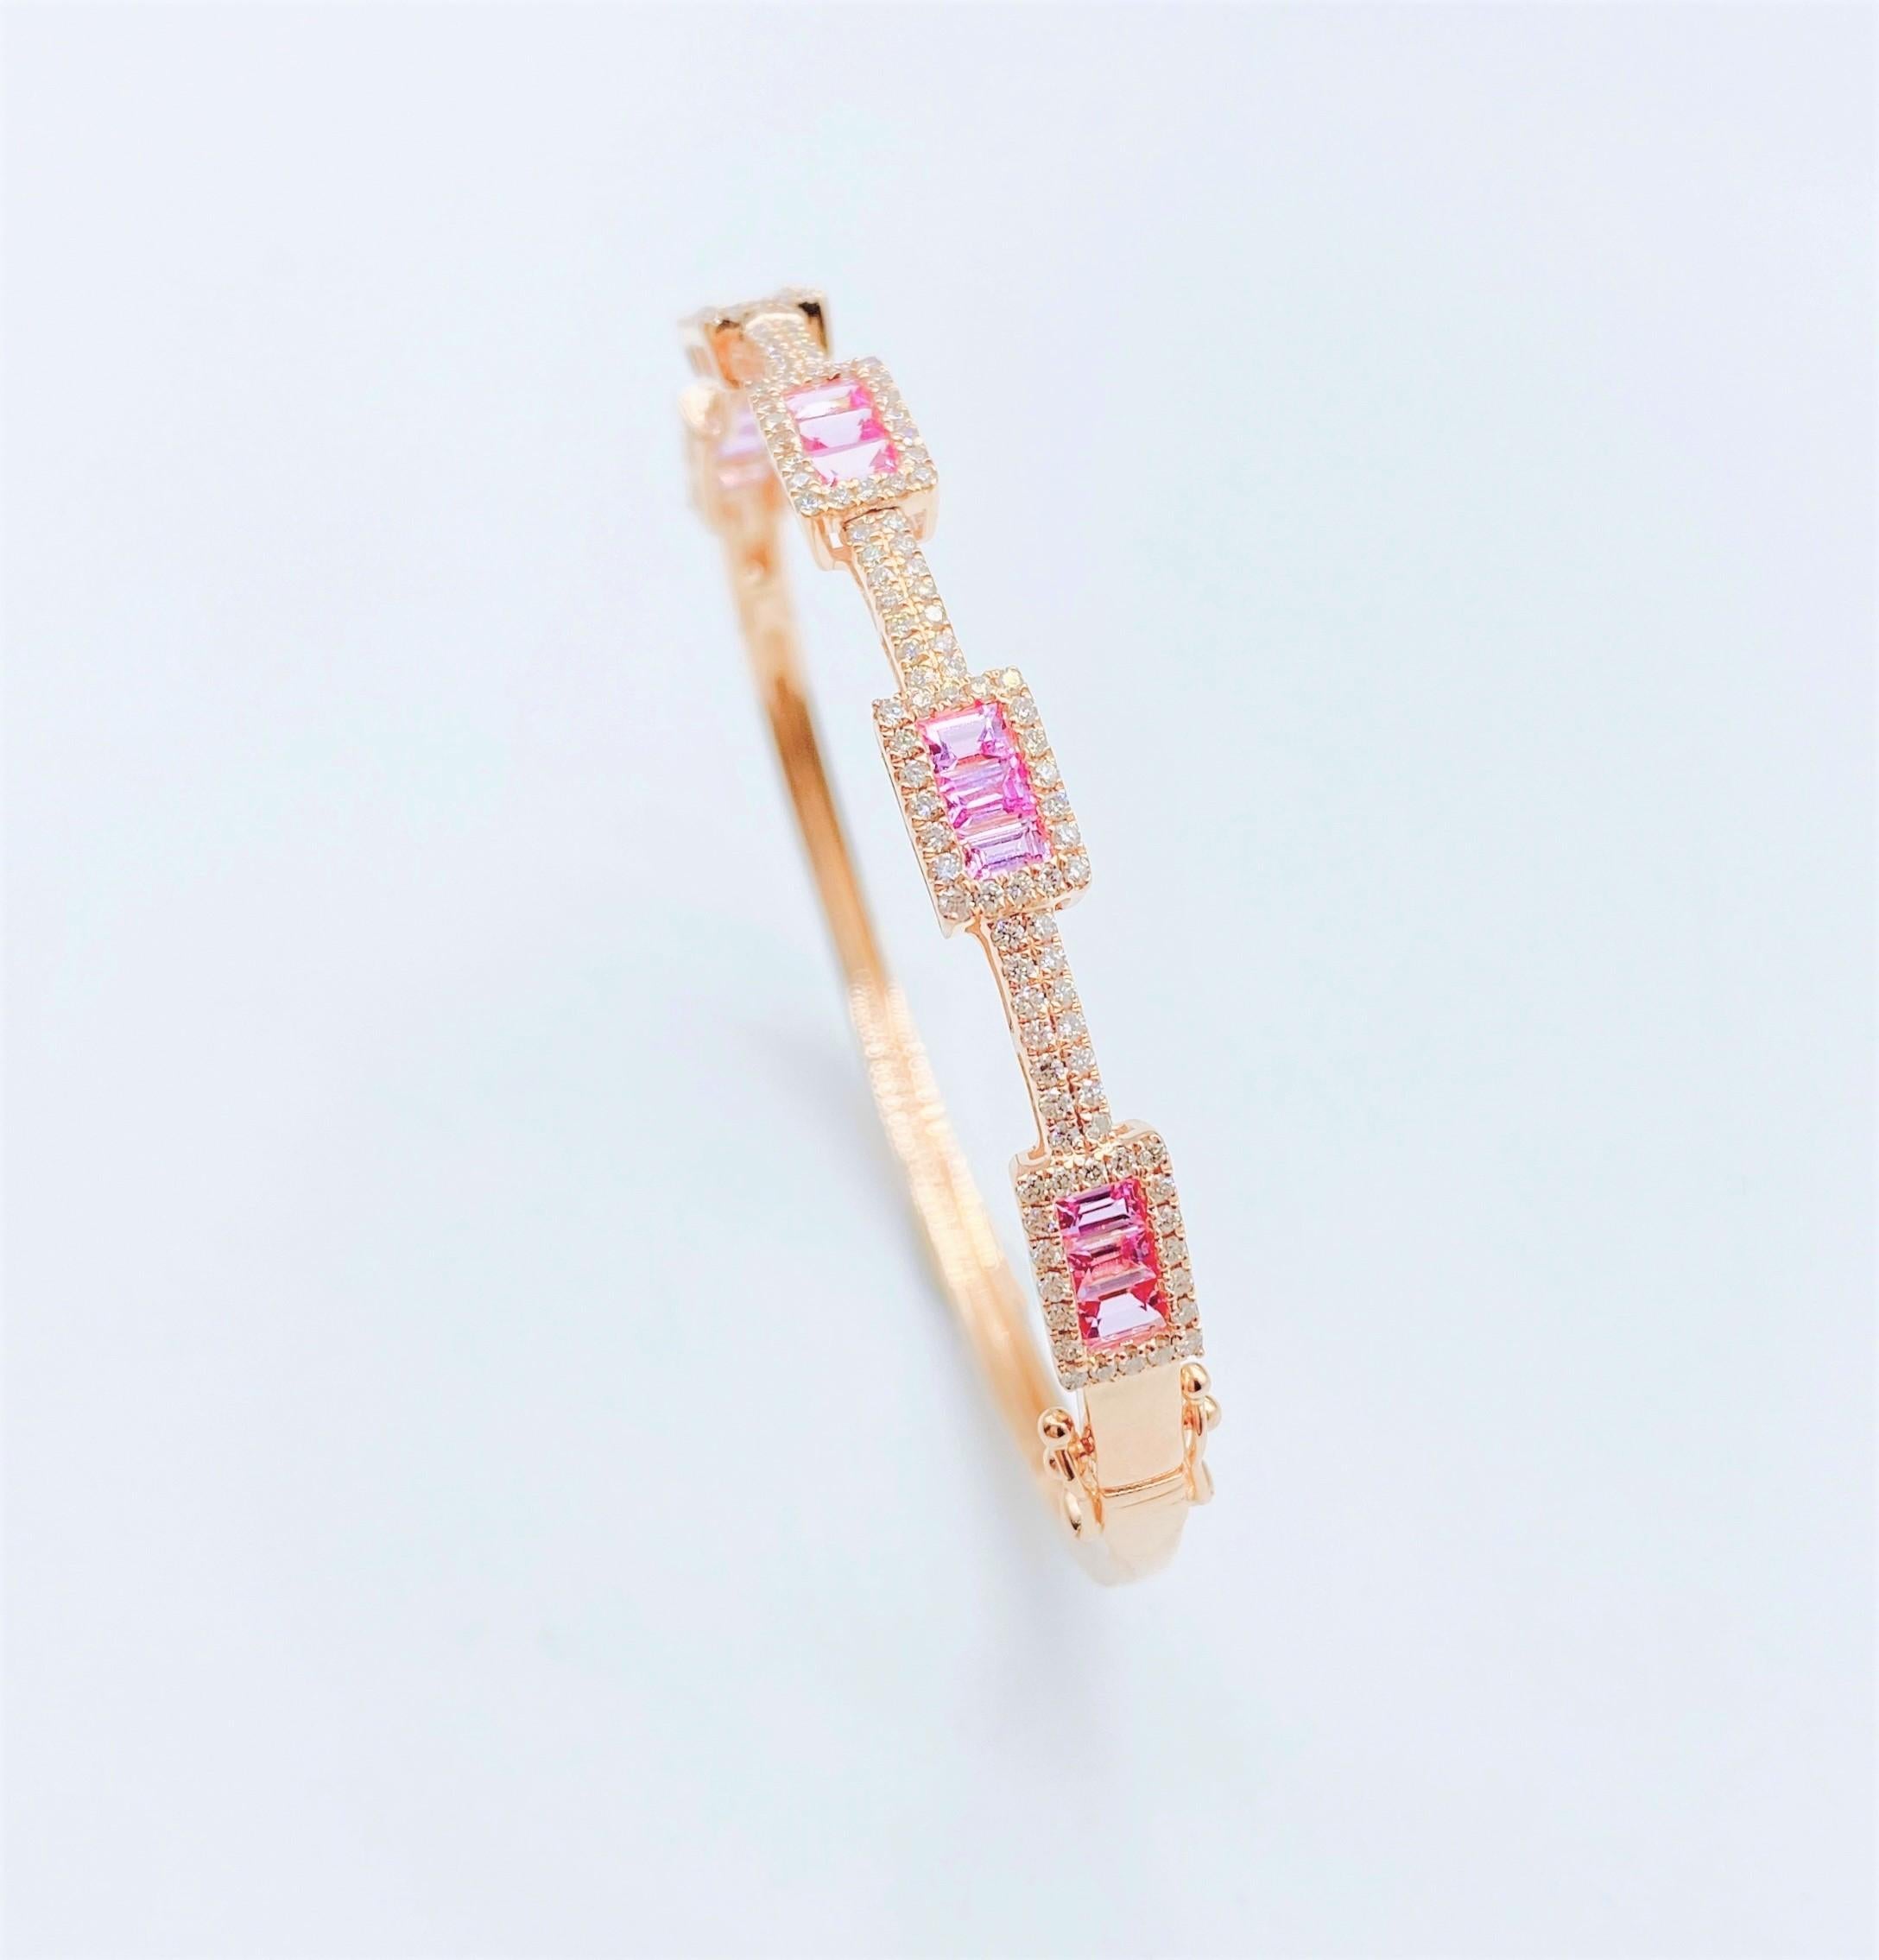 The Following Items we are offering is a Rare Important Radiant  18KT Gold Glistening Magnificent Large Baguette Cut Pink Sapphire and Round Cut Diamond Bracelet. These Gorgeous Pink Sapphires are Glowing and Glittering and the Diamonds are